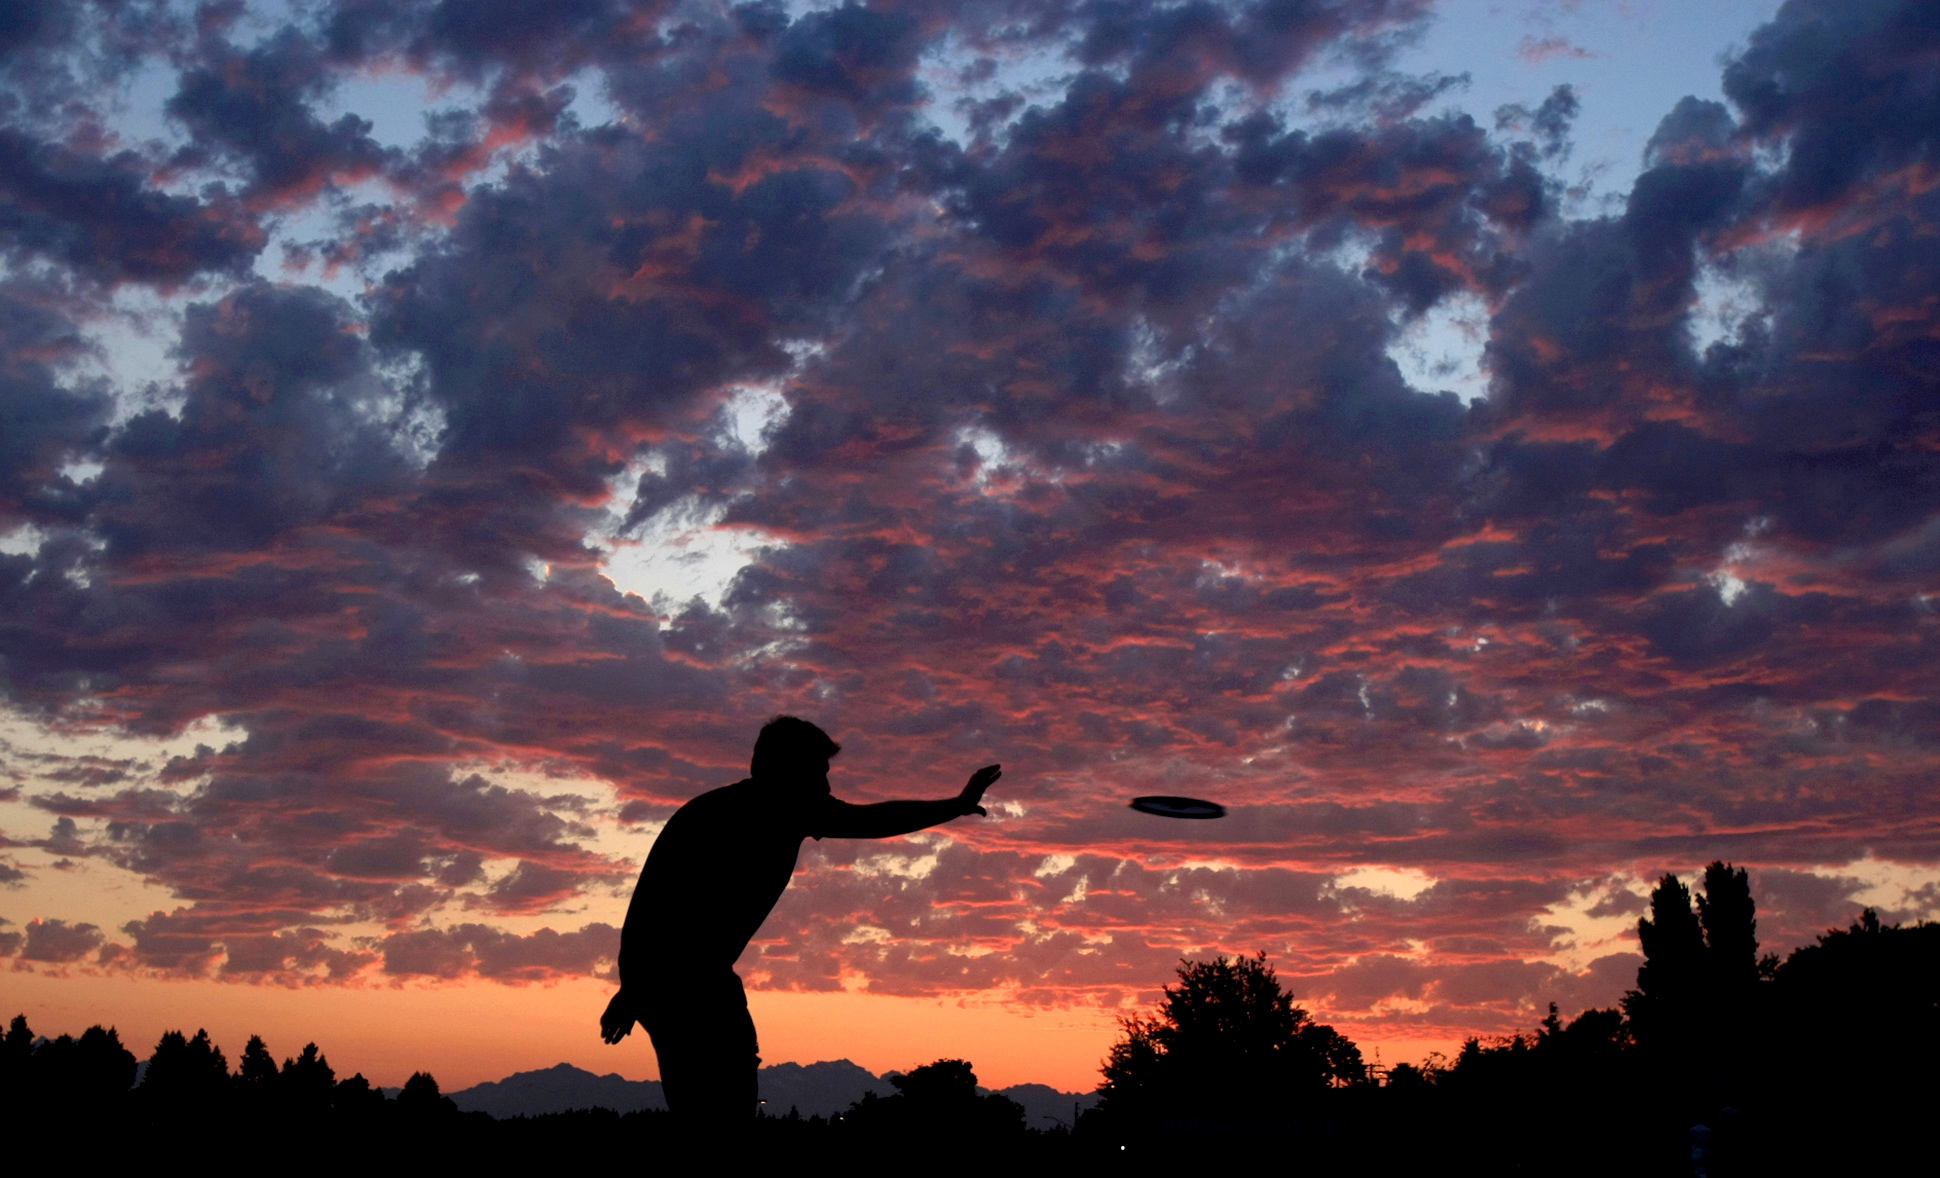 Colin Potter of Bremerton reaches out to catch a flying disc during an orange sunset last week.